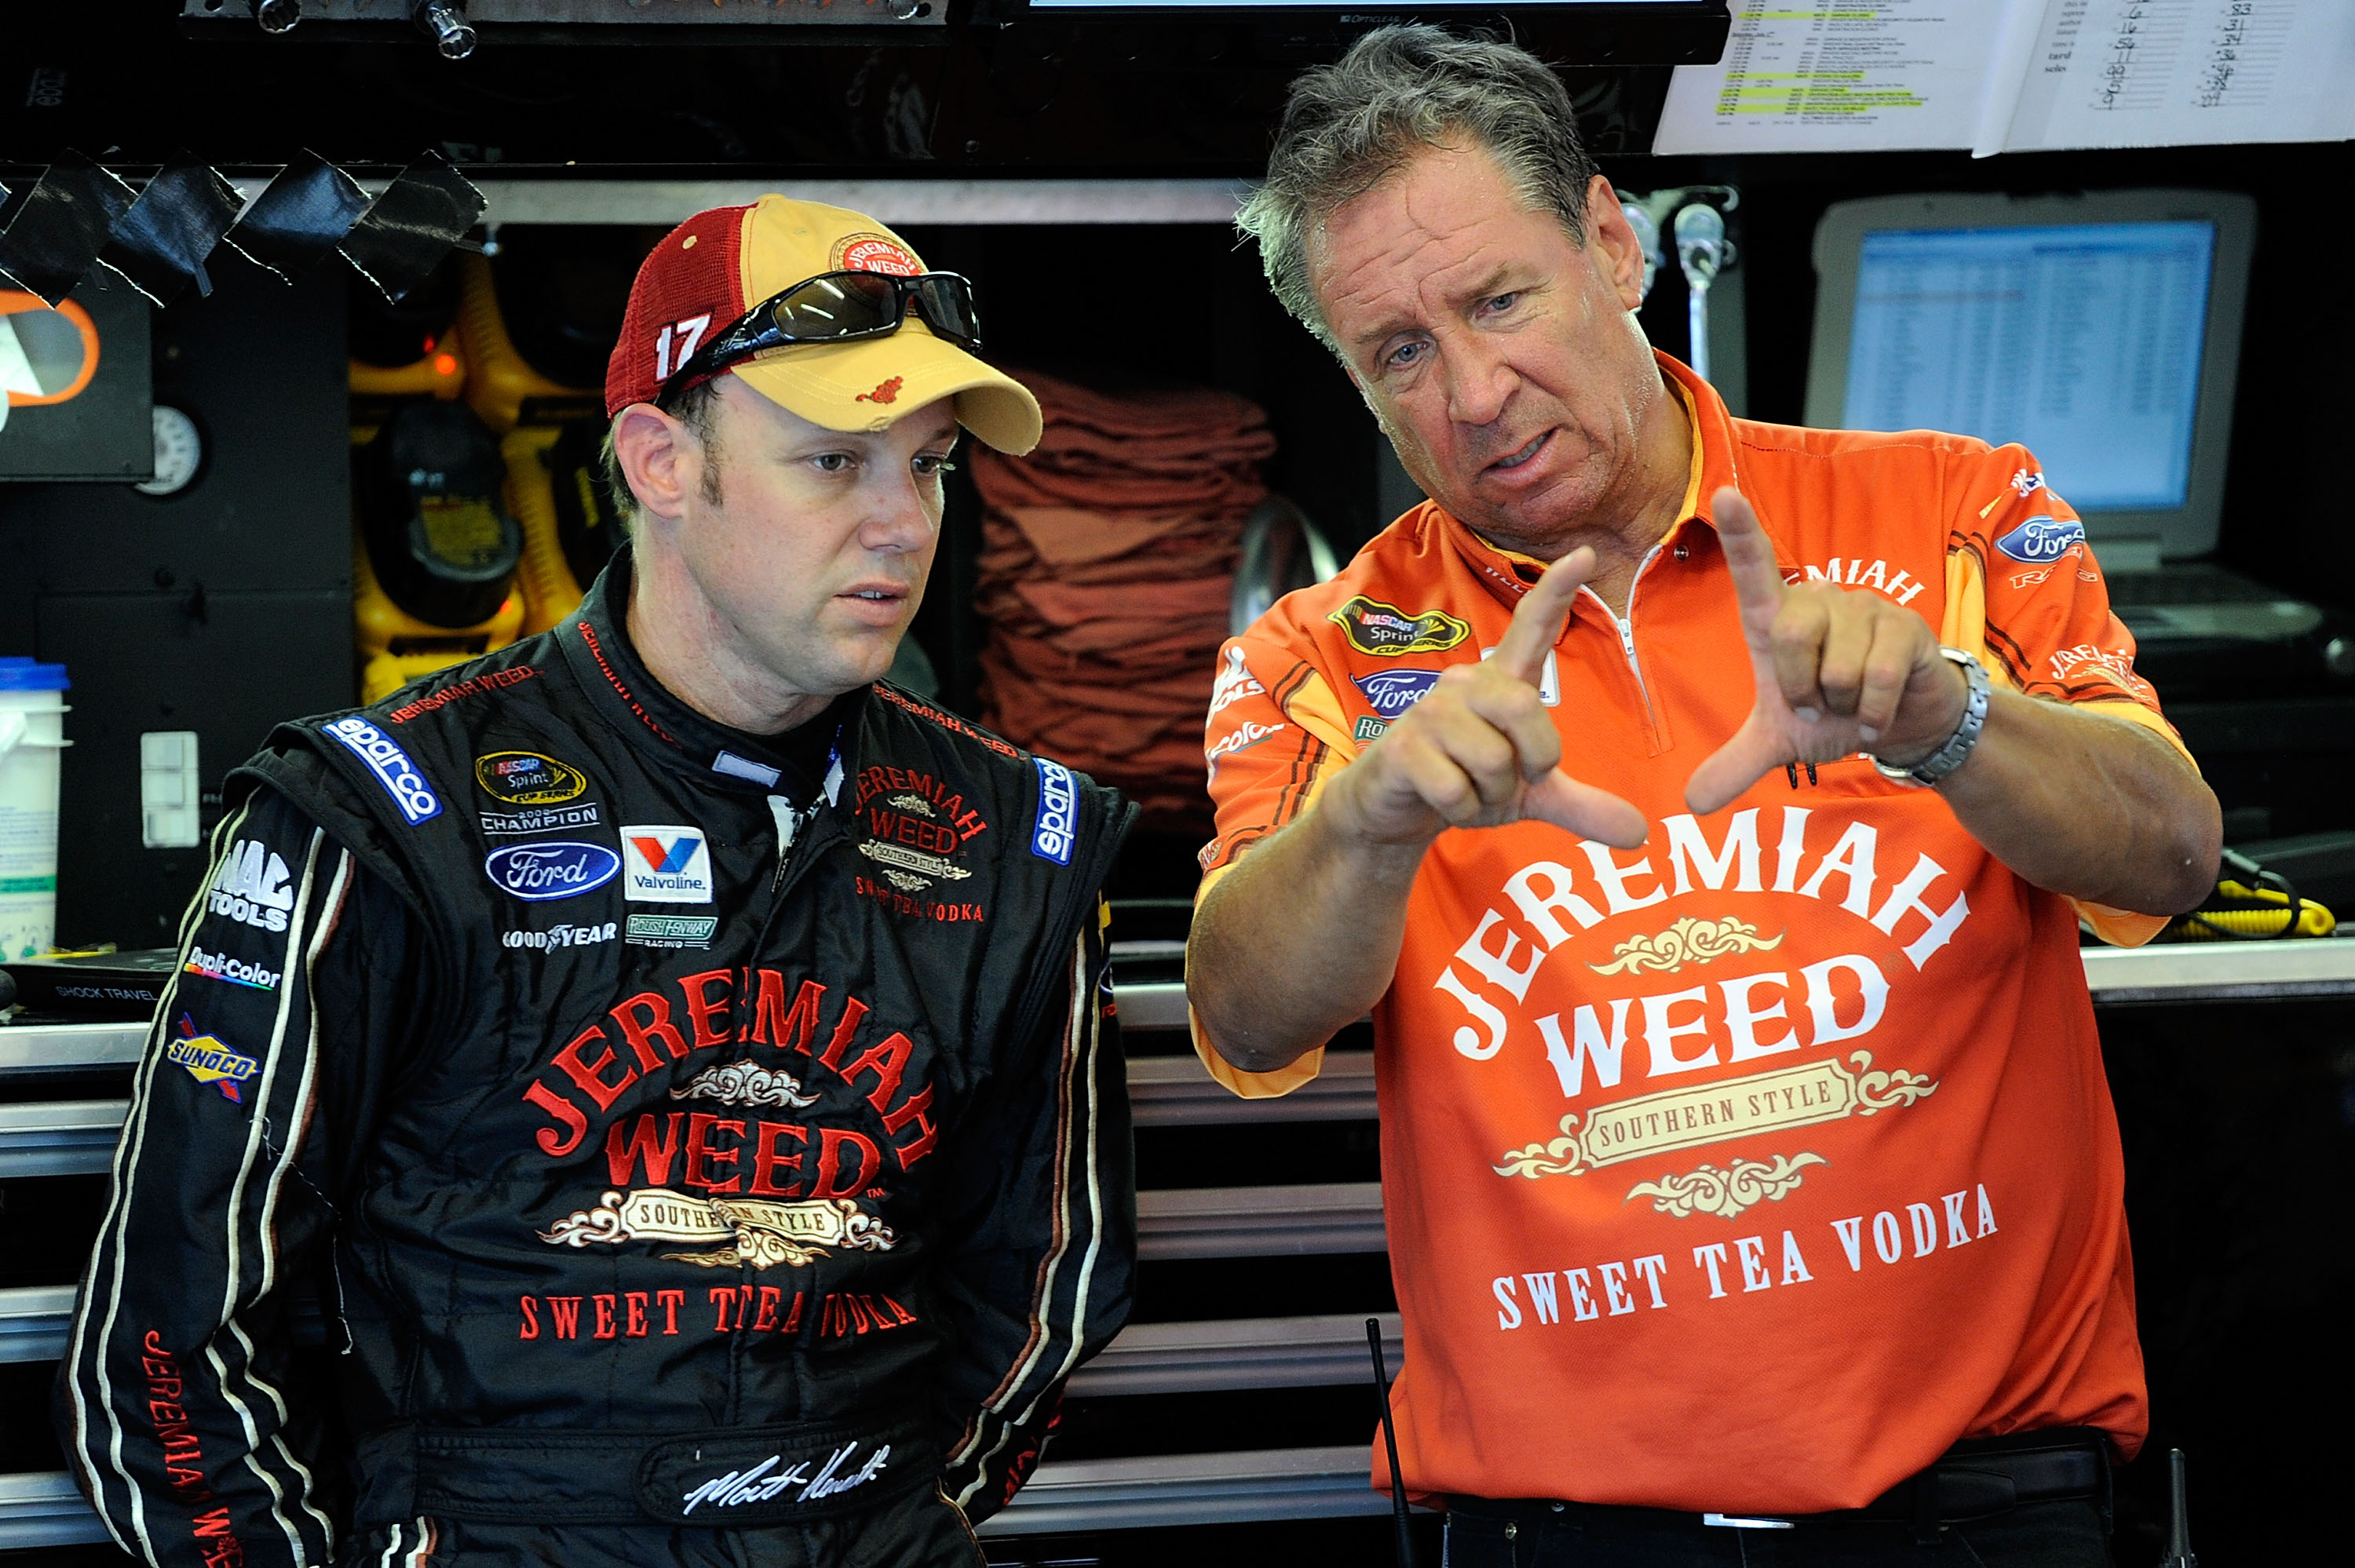 DAYTONA BEACH, FL - JULY 01:  Matt Kenseth (L), driver of the #17 Jeremiah Weed Ford, talks with crew chief Jimmy Fennig in the garage during practice for the NASCAR Sprint Cup Series Coke Zero 400 at Daytona International Speedway on July 1, 2010 in Dayt